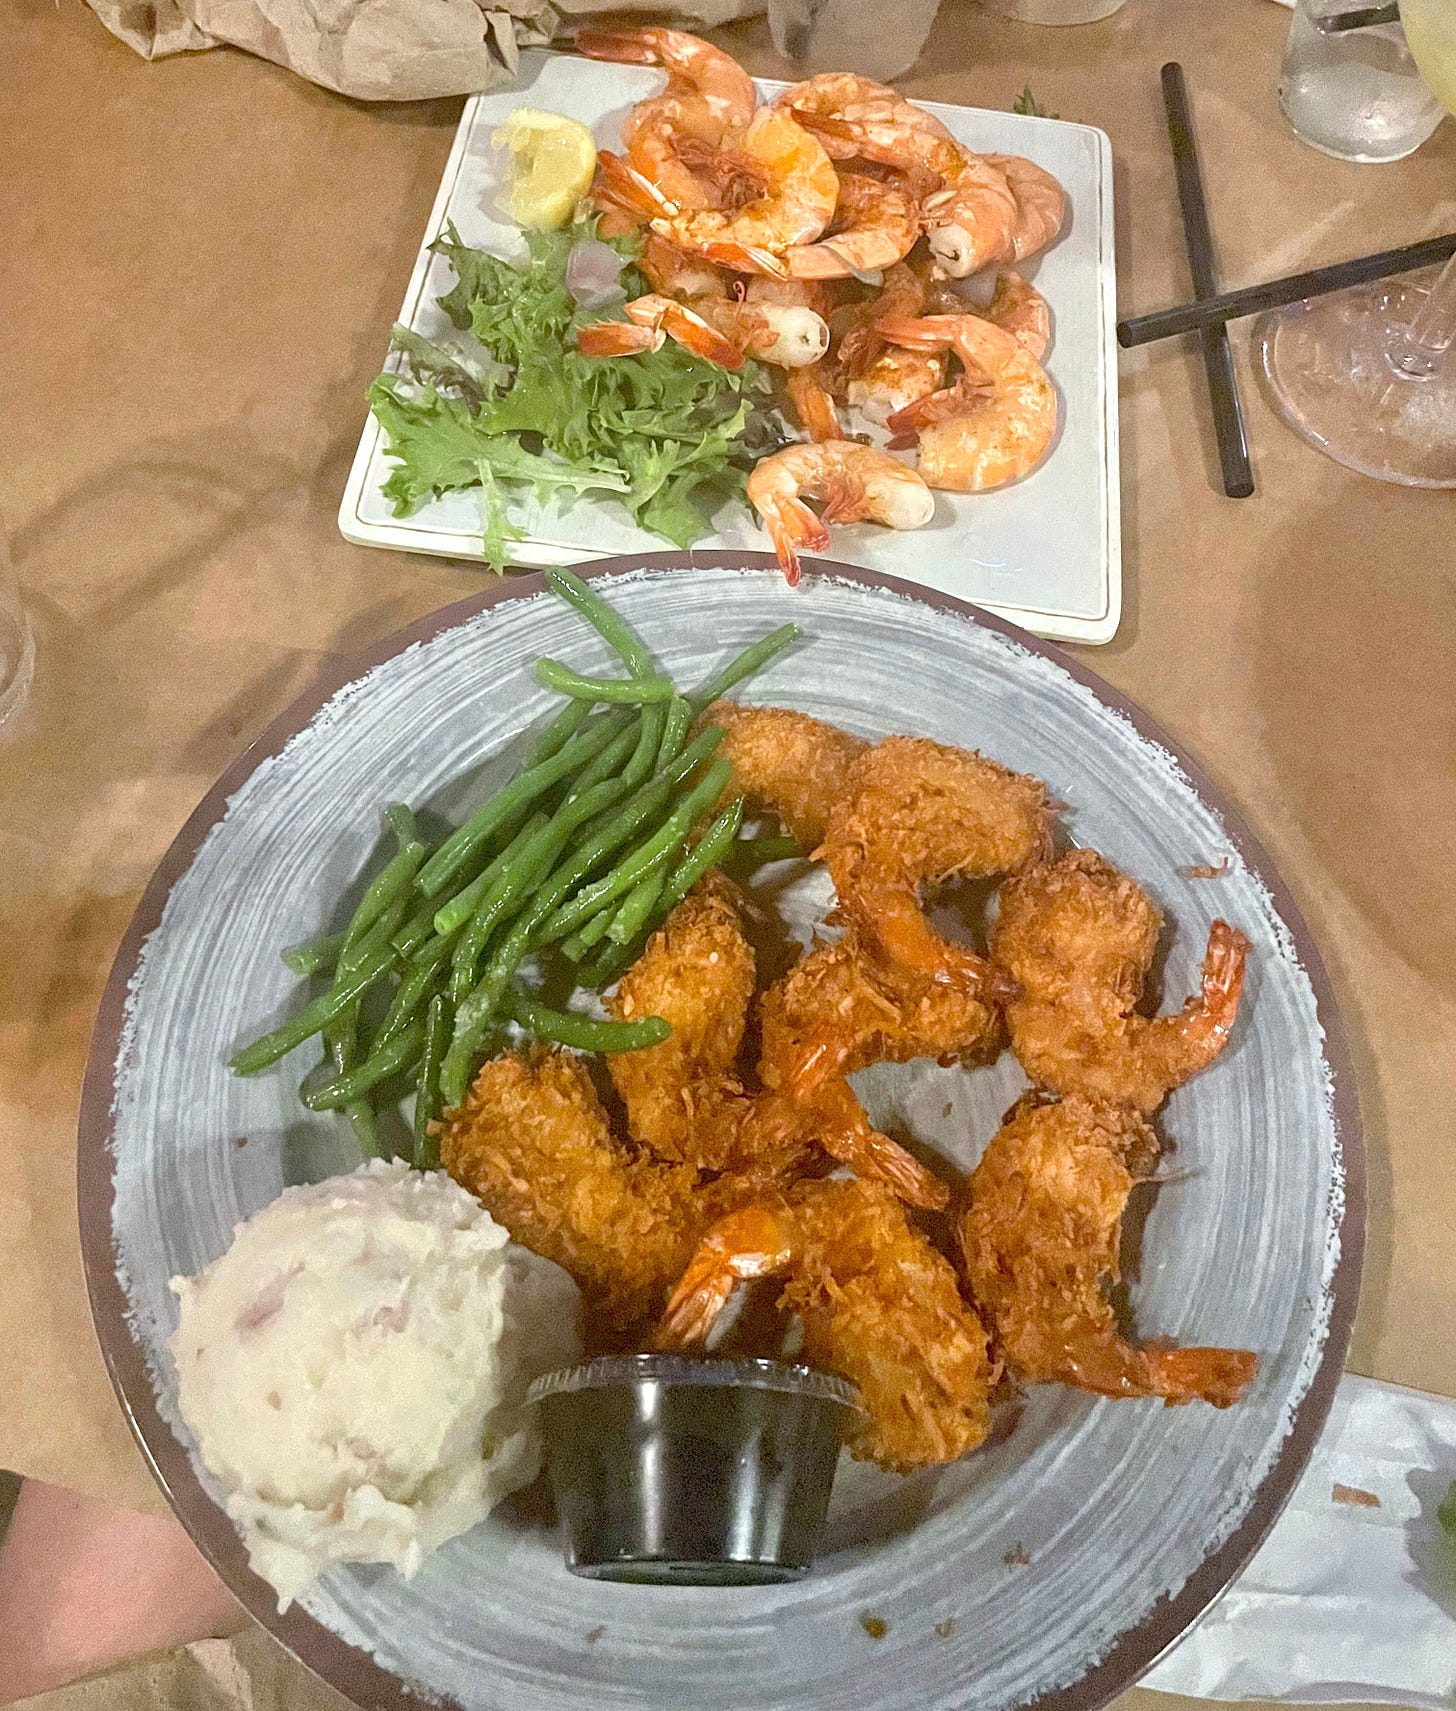 coconut shrimp with green beans and mashed potatoes and plate of steamed shrimp